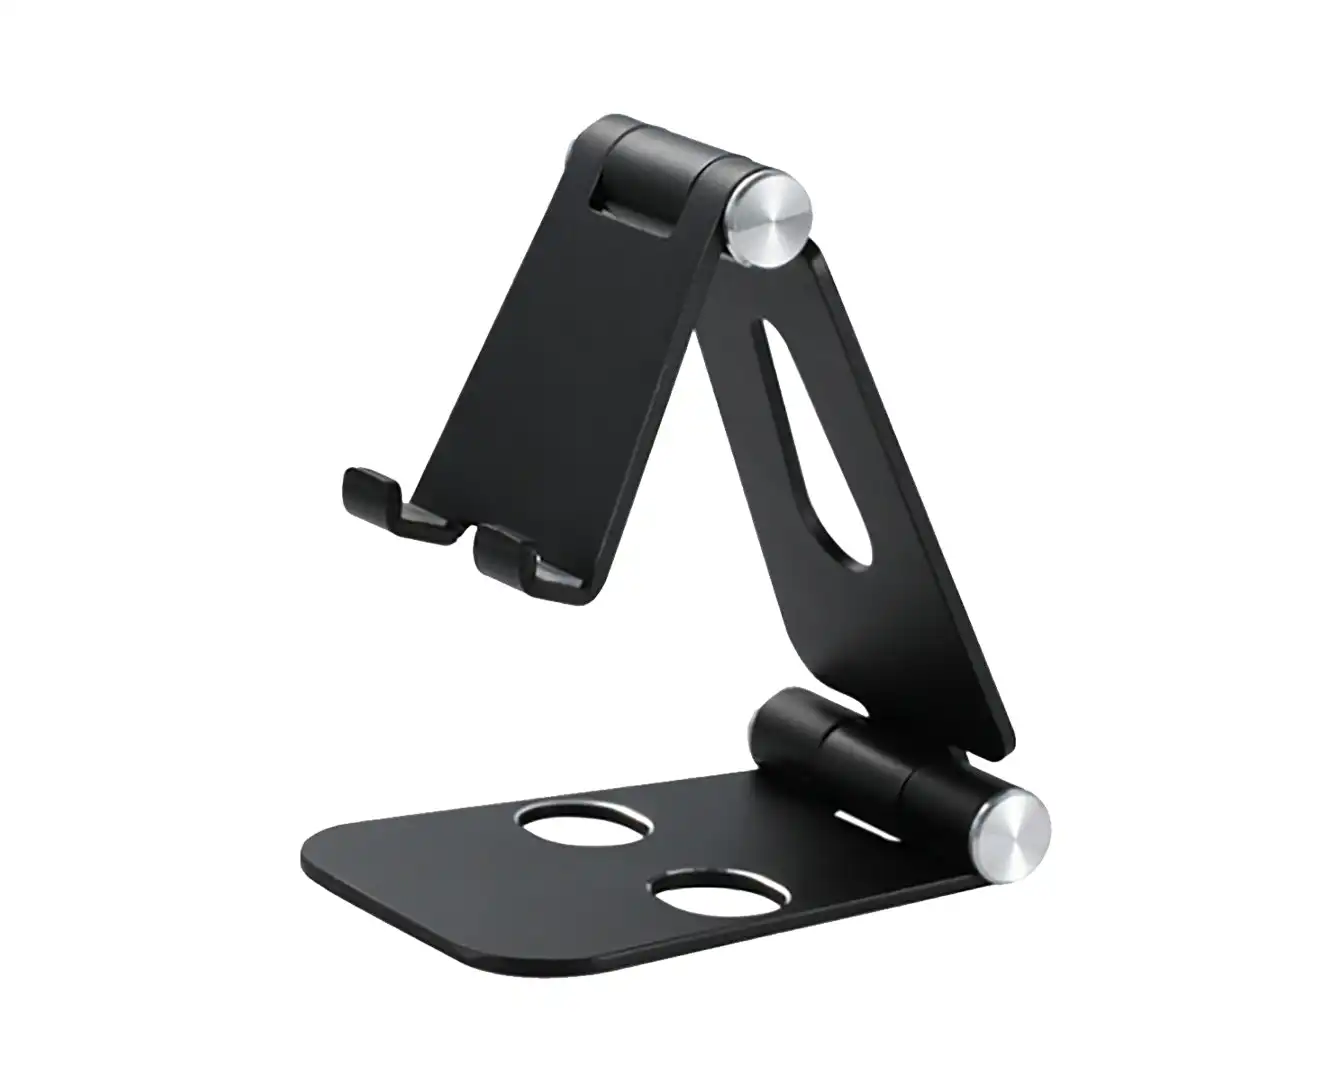 Orotec Foldable Metal Phone and Tablet Stand (Medium Size) Black